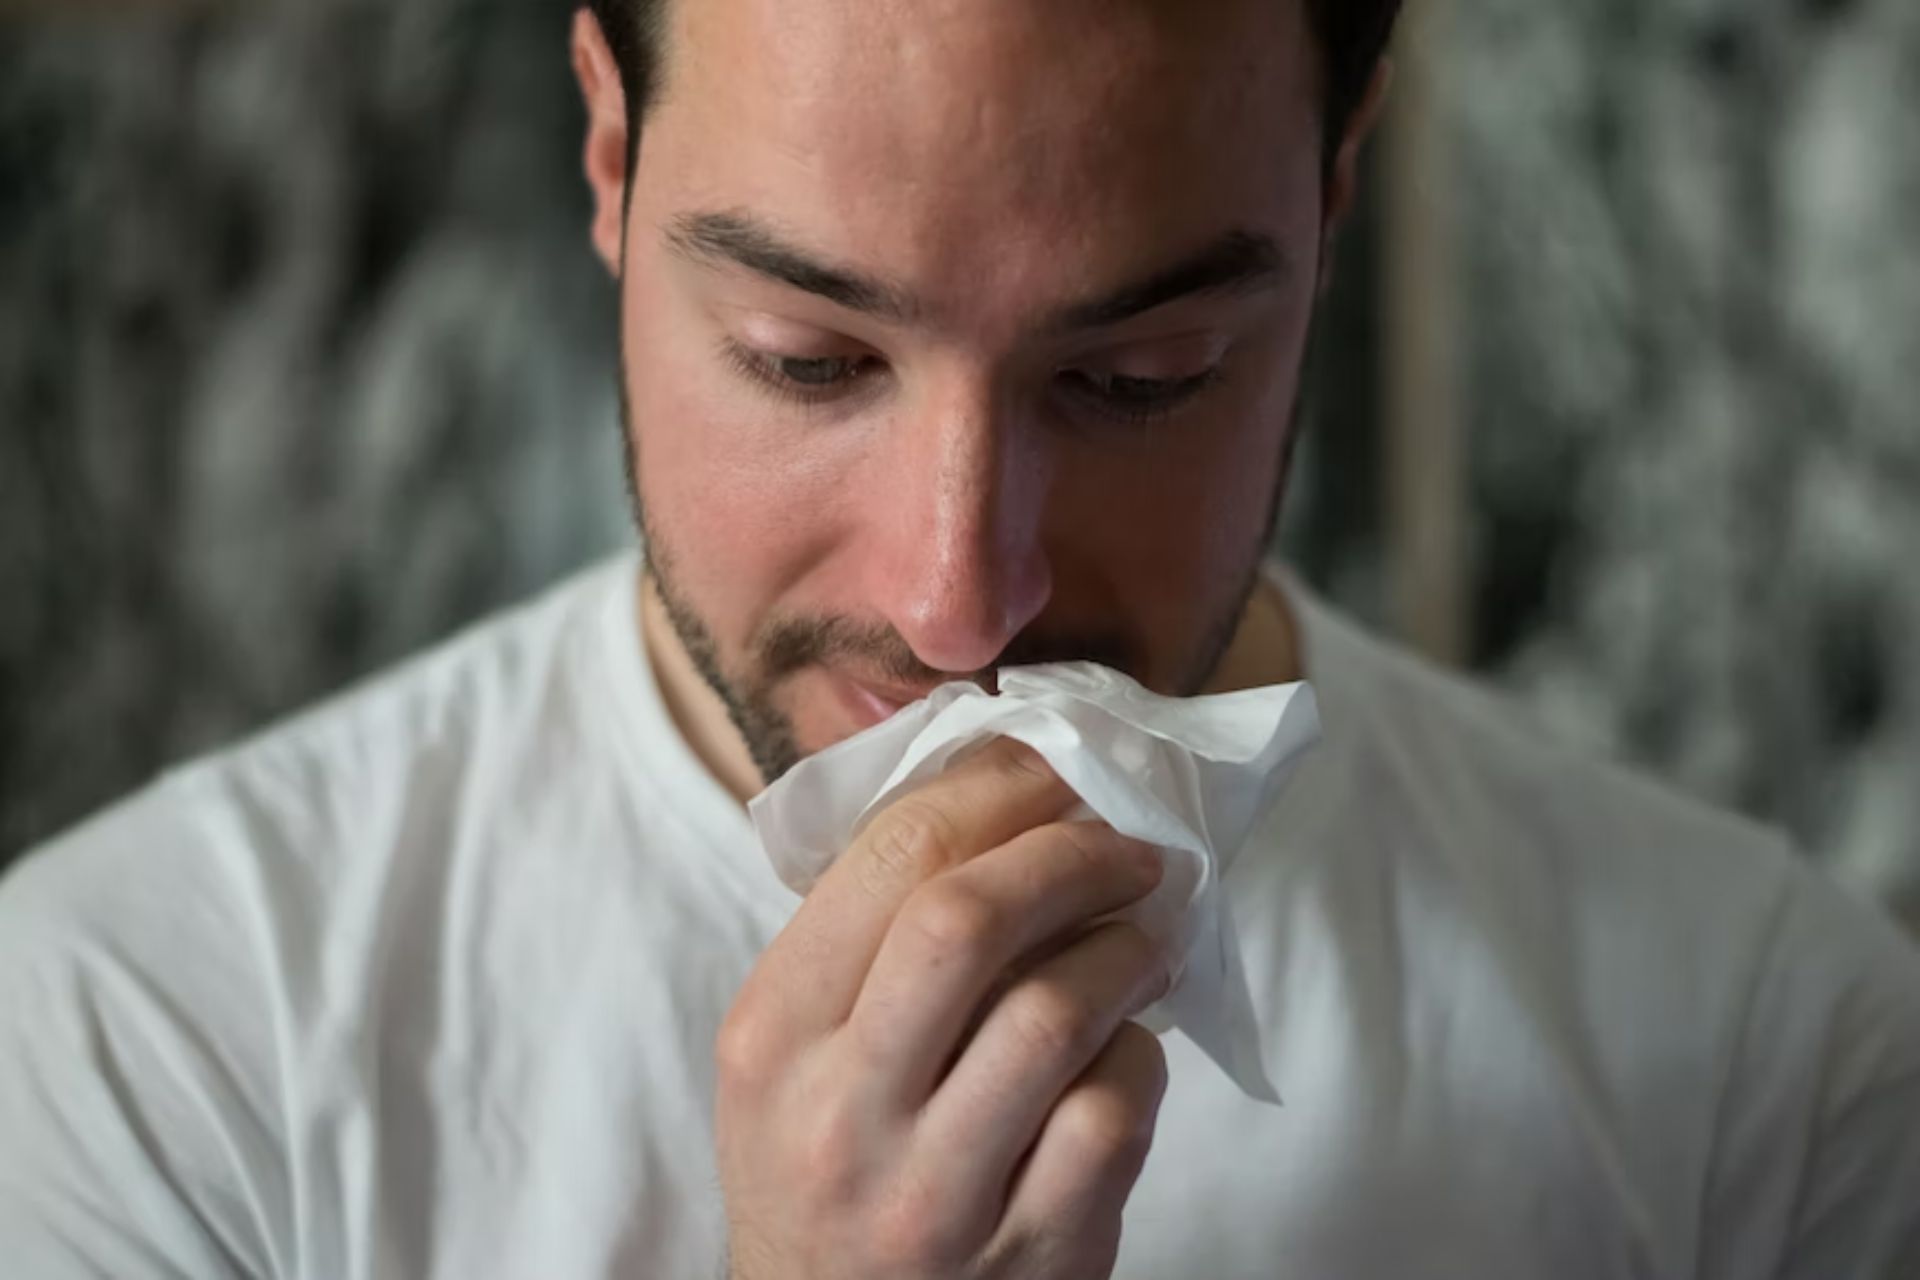 Man dealing with allergies, using tissue.